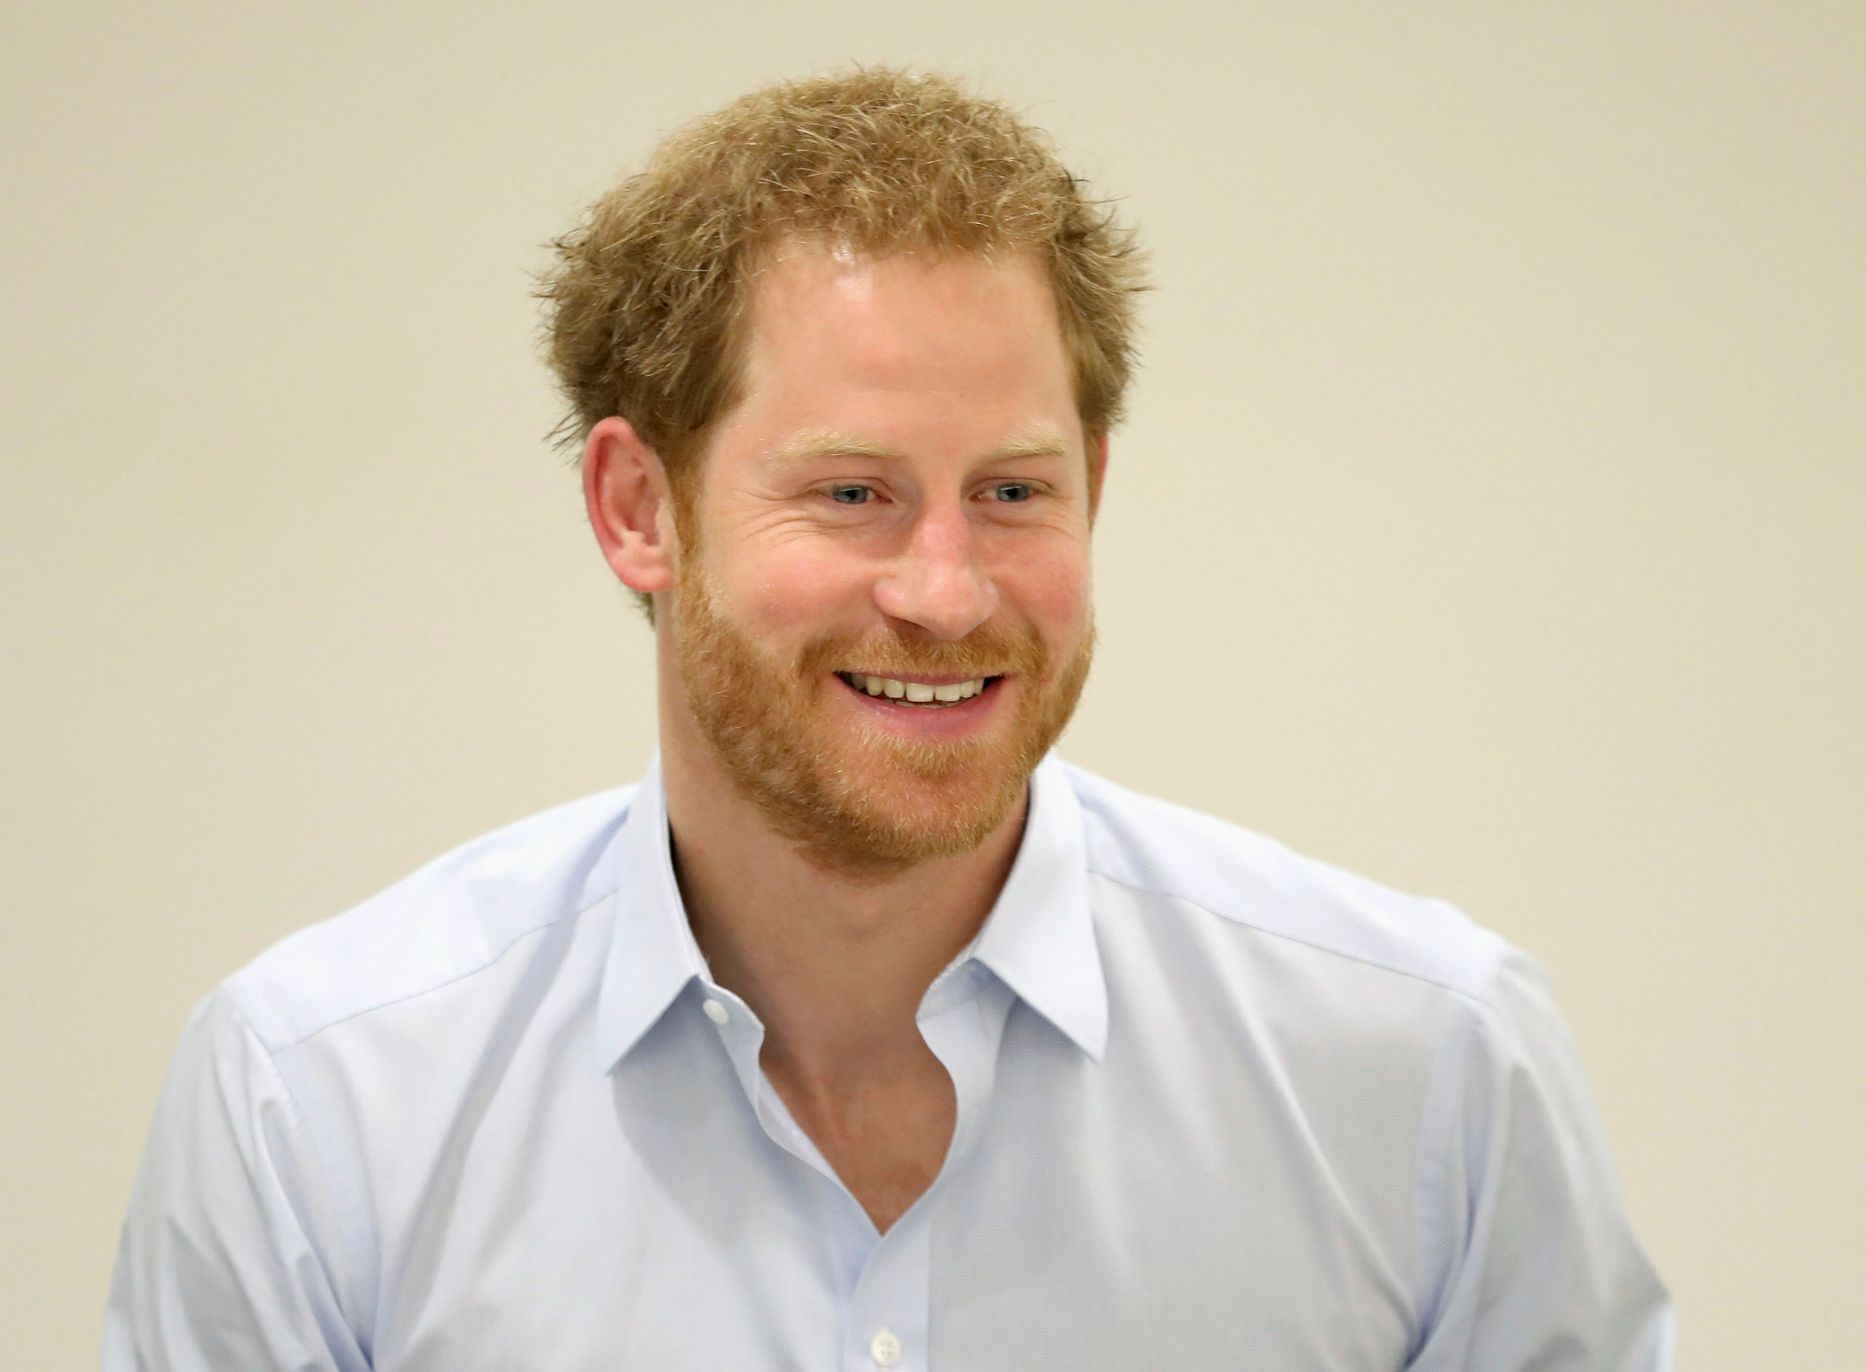 Prince Harry chats with staff during his visit to the Burrell Street Sexual Health Clinic in London.